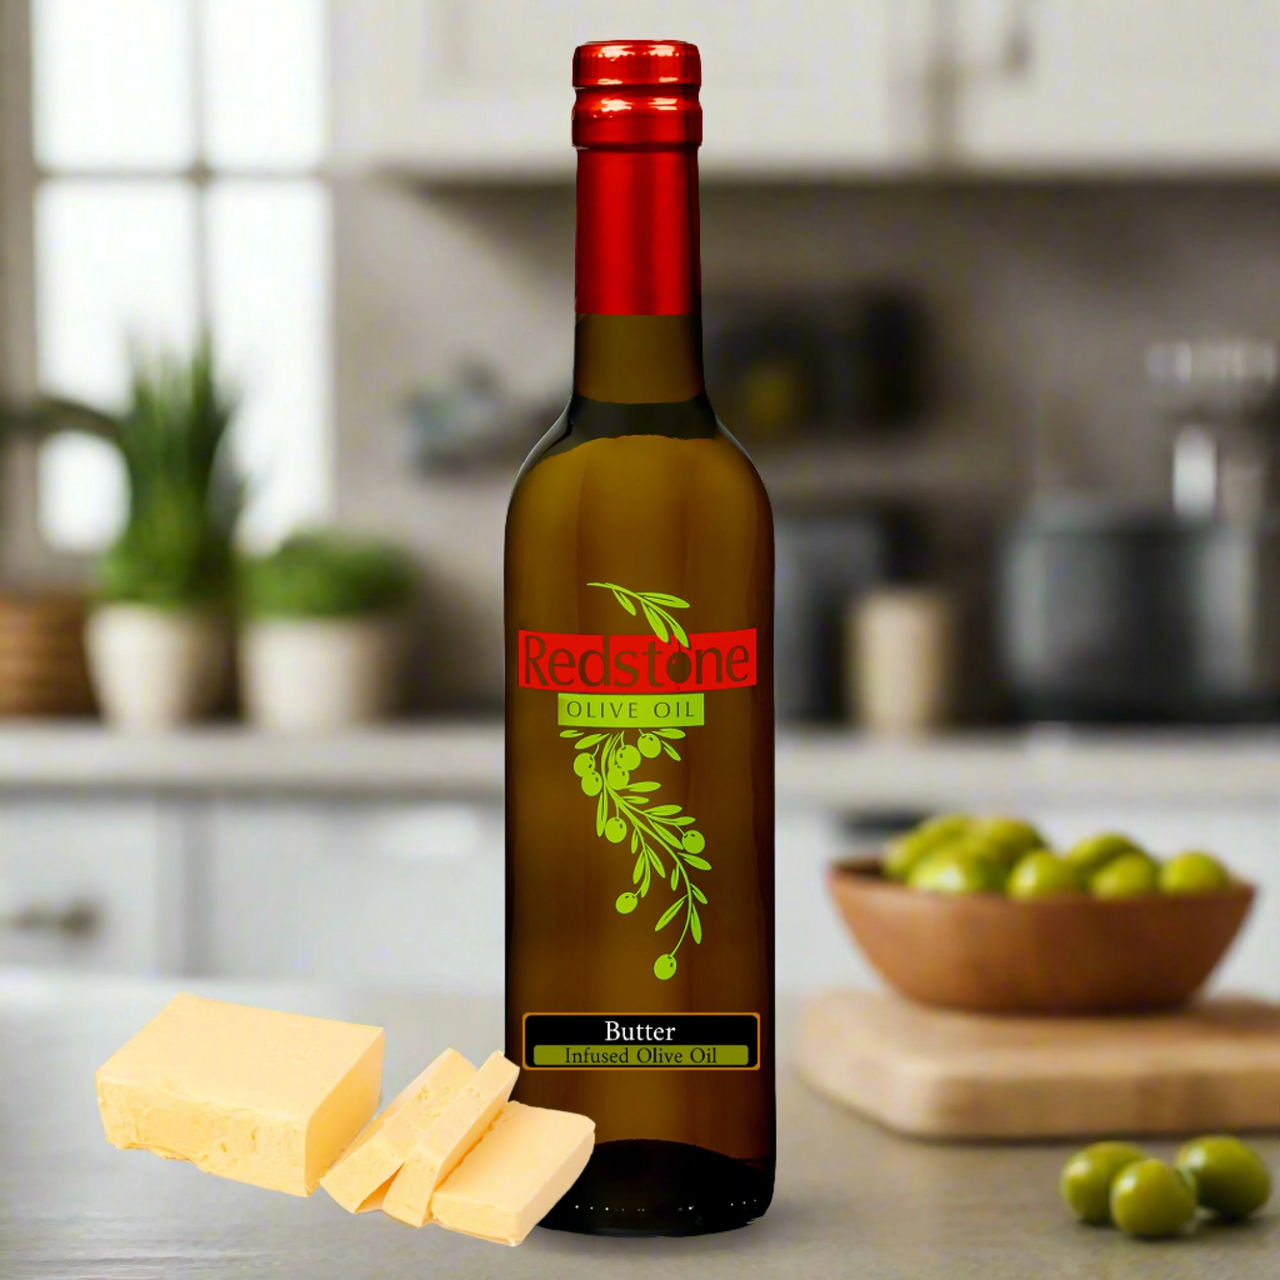 A single bottle of butter-infused olive oil next to a wedge of artisan cheese